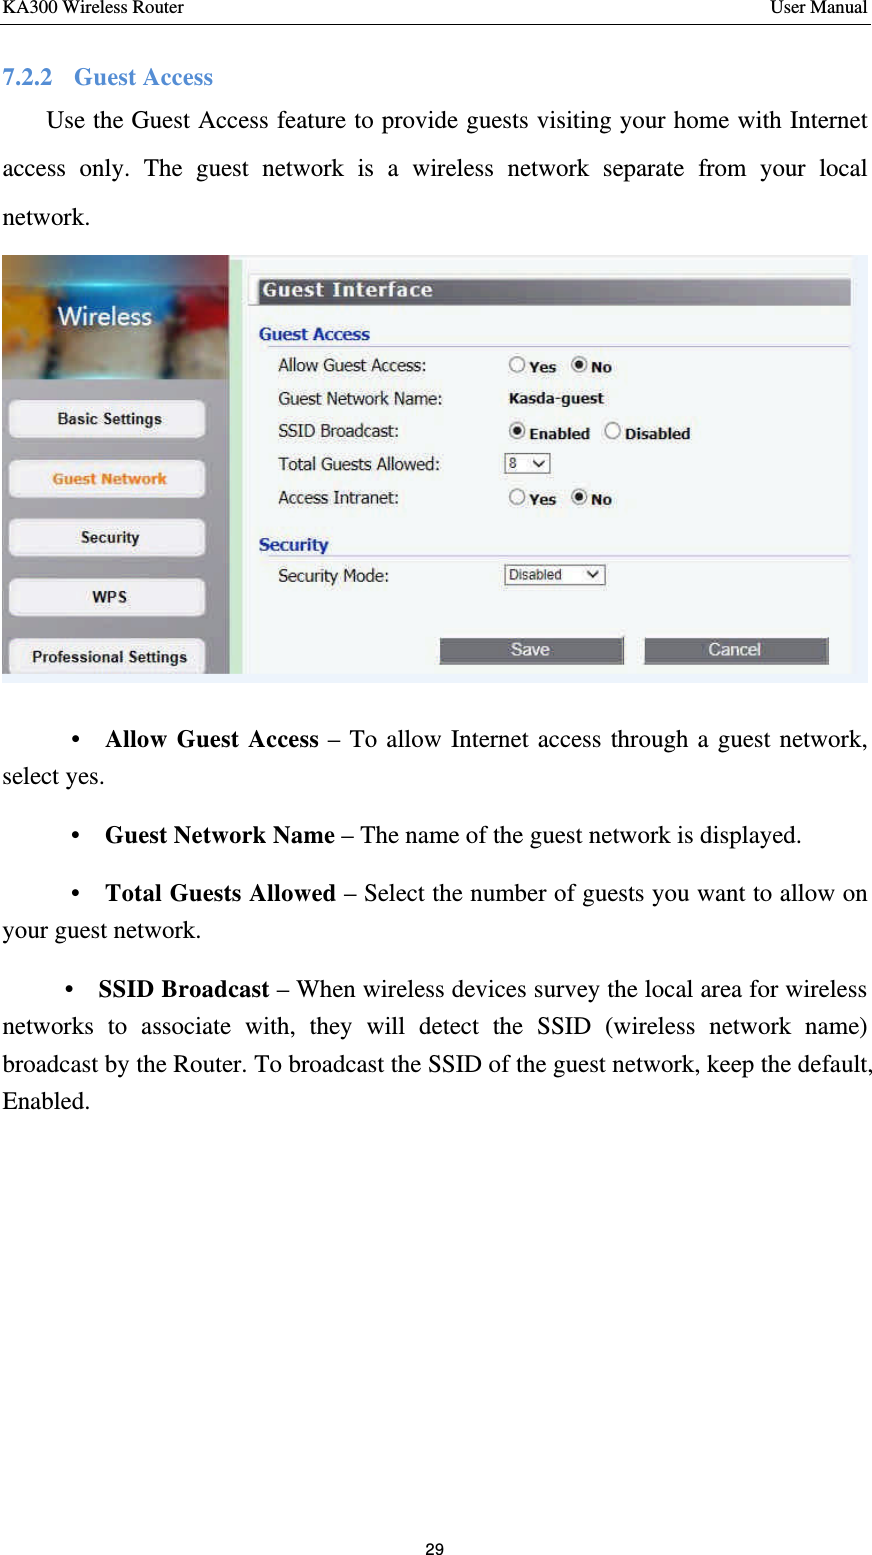 KA300 Wireless Router       User Manual 29  7.2.2    Guest Access     Use the Guest Access feature to provide guests visiting your home with Internet access only. The guest network is a wireless network separate from your local network.         •  Allow Guest Access – To allow Internet access through a guest network, select yes.    •  Guest Network Name – The name of the guest network is displayed.    •  Total Guests Allowed – Select the number of guests you want to allow on your guest network.   •  SSID Broadcast – When wireless devices survey the local area for wireless networks to associate with, they will detect the SSID (wireless network name) broadcast by the Router. To broadcast the SSID of the guest network, keep the default, Enabled.      